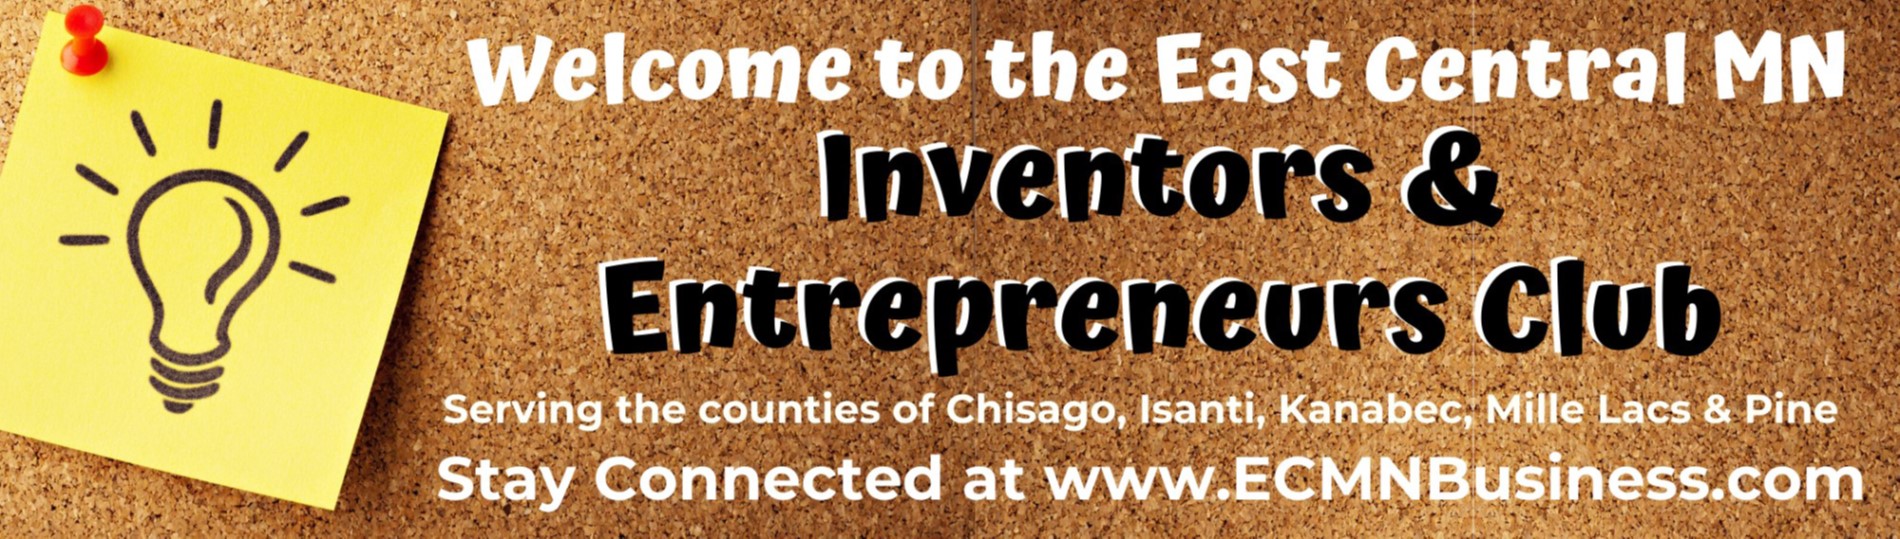 Event Promo Photo For East Central MN Inventors & Entrepreneurs Club